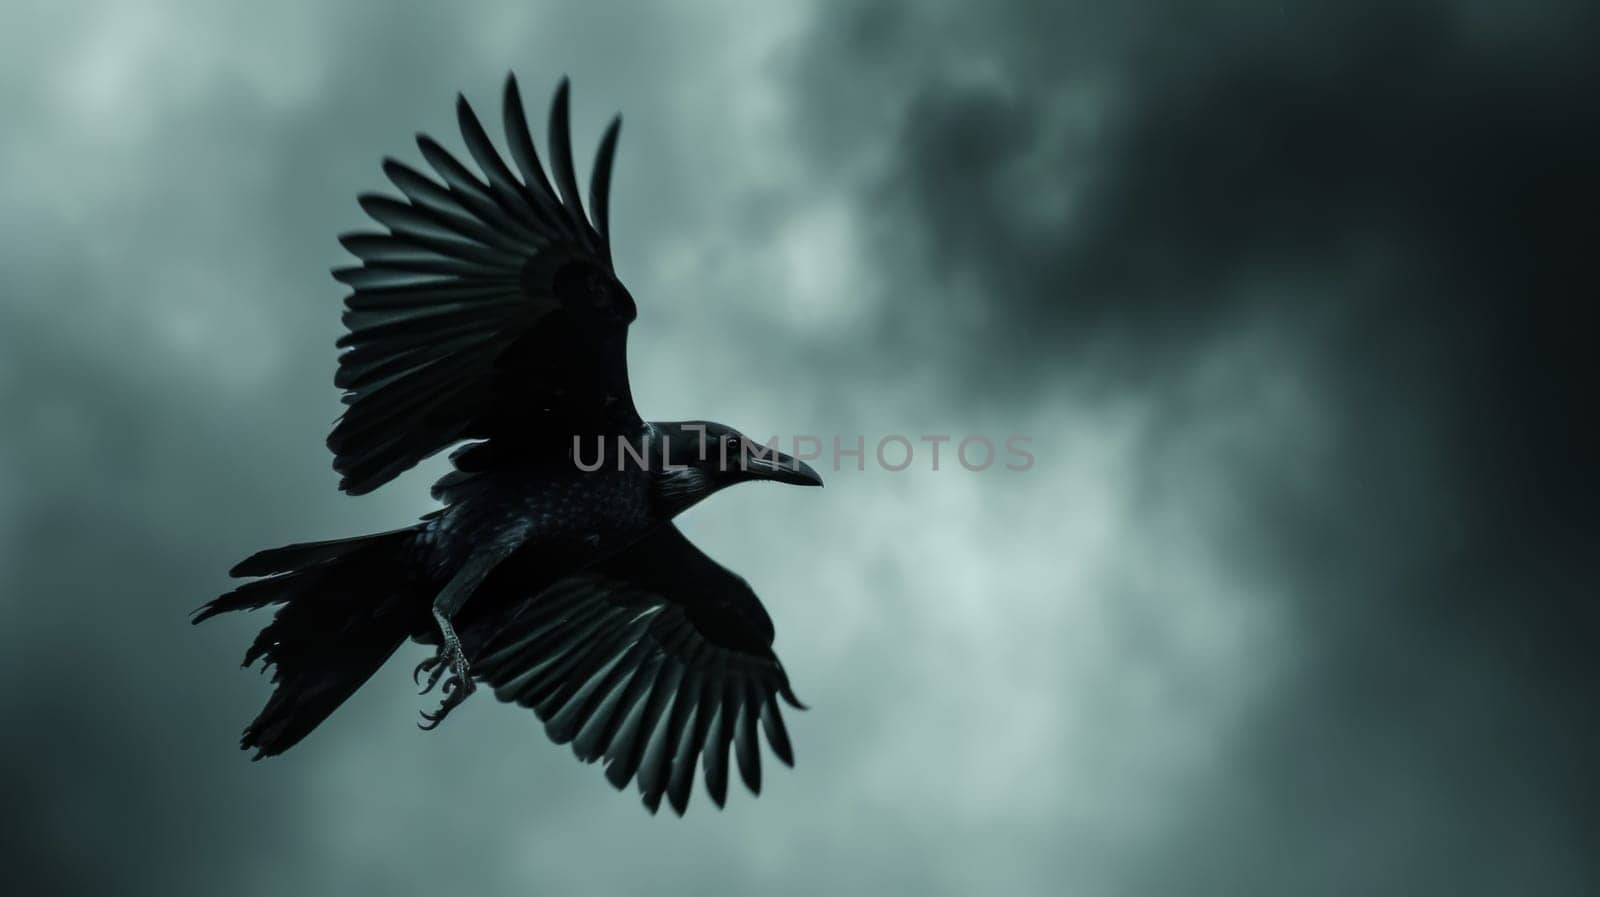 A large black bird flying in the sky with dark clouds